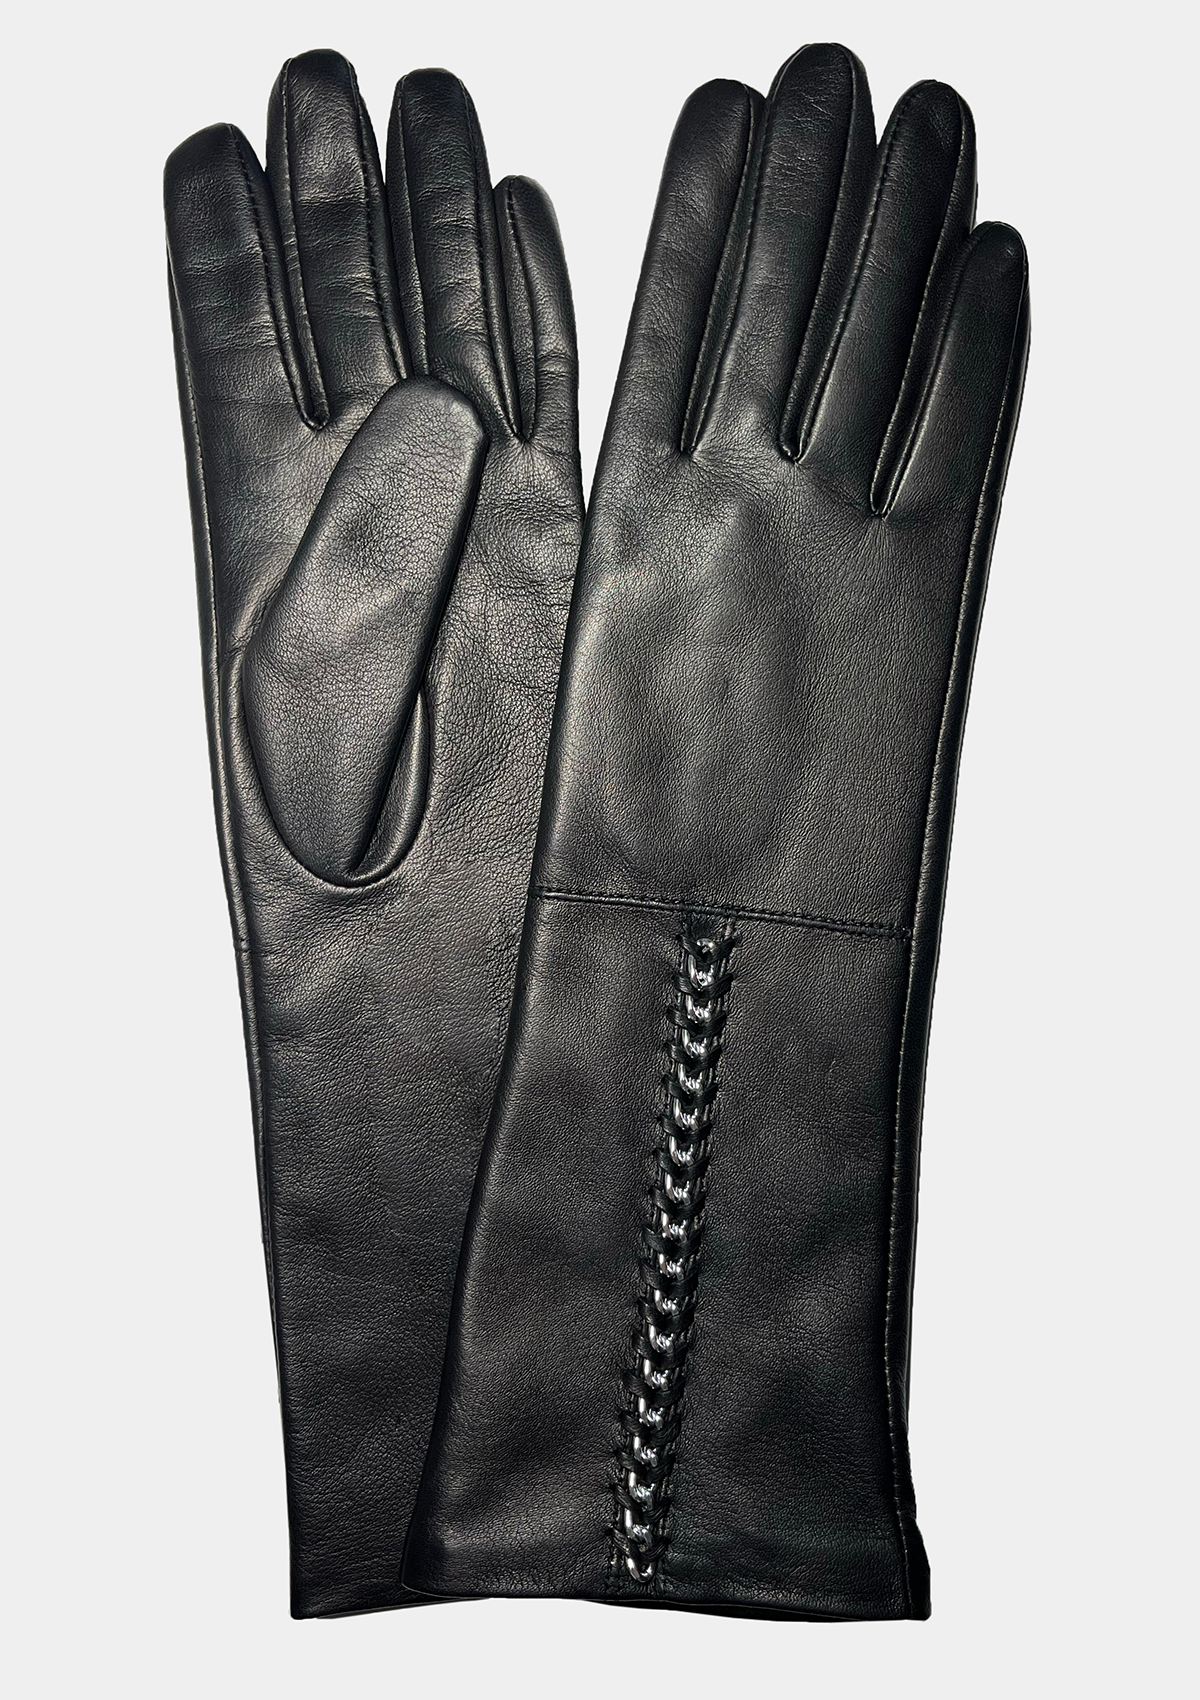 LEATHER AND CHAIN GAUNTLET GLOVE